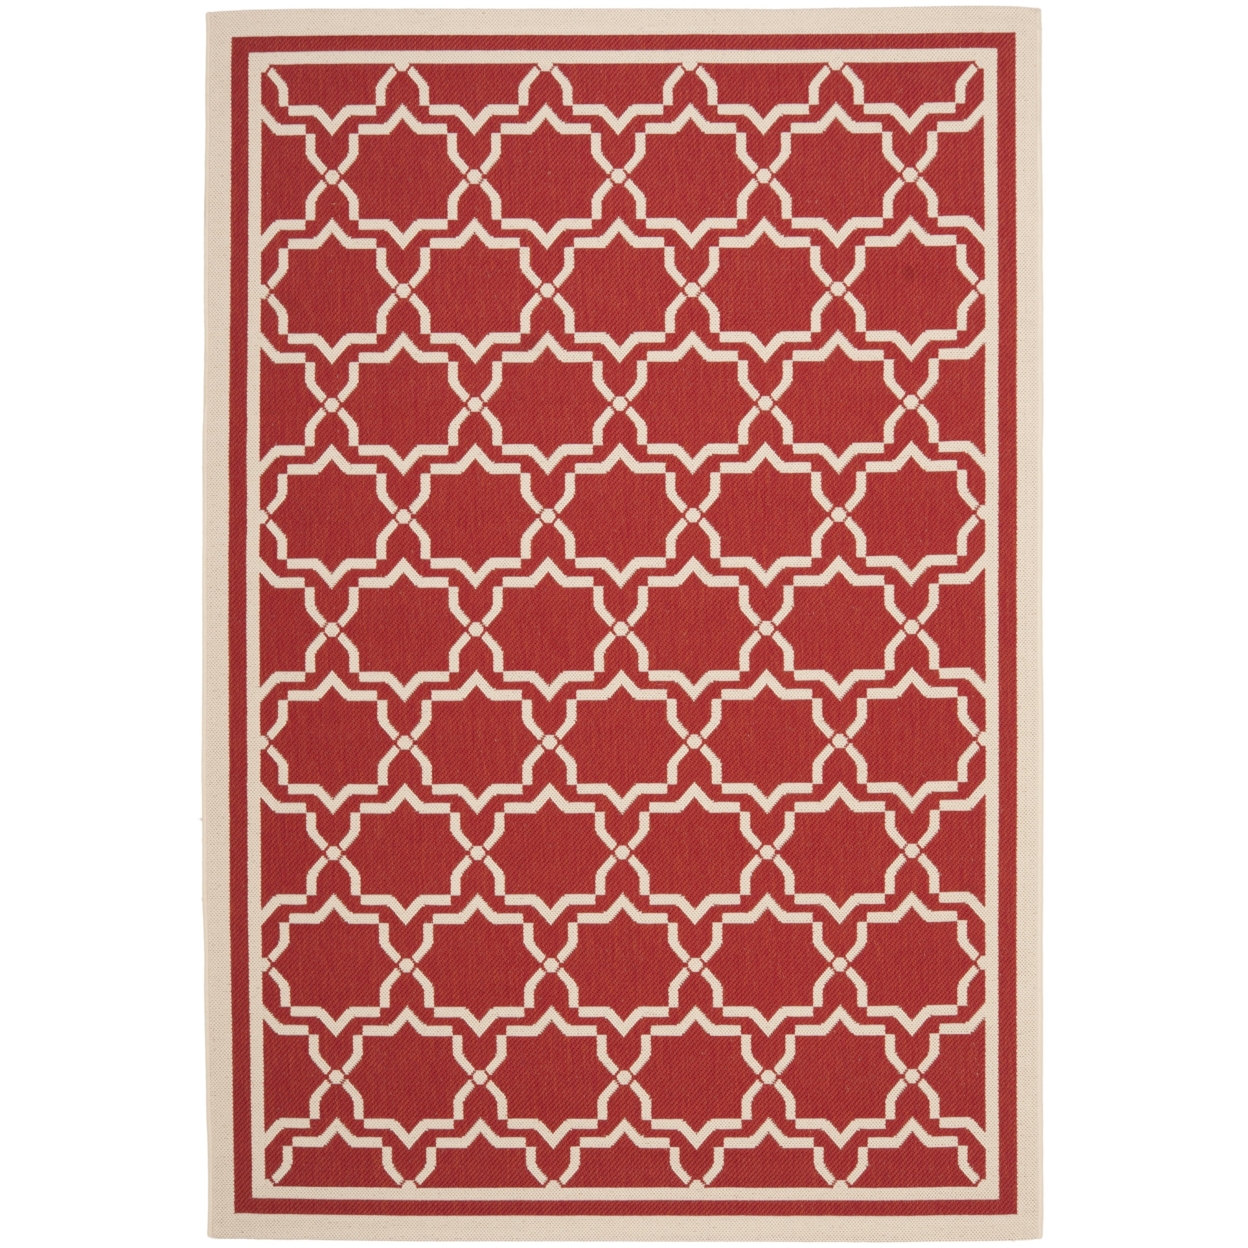 SAFAVIEH Outdoor CY6916-248 Courtyard Collection Red / Bone Rug - 4' X 5' 7